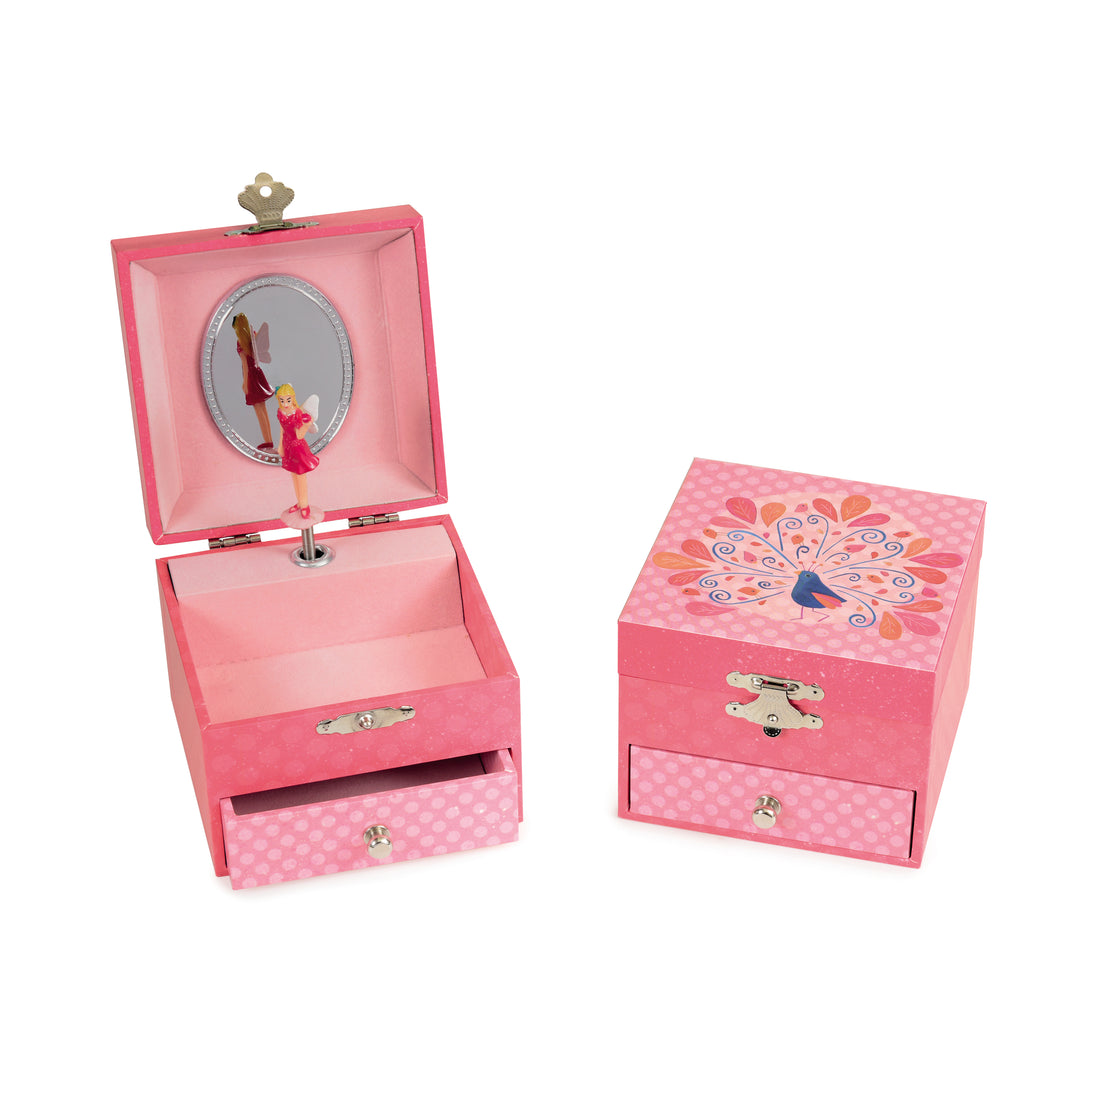 egmont-toys-musical-jewelry-box-with-drawer-peacock- (1)